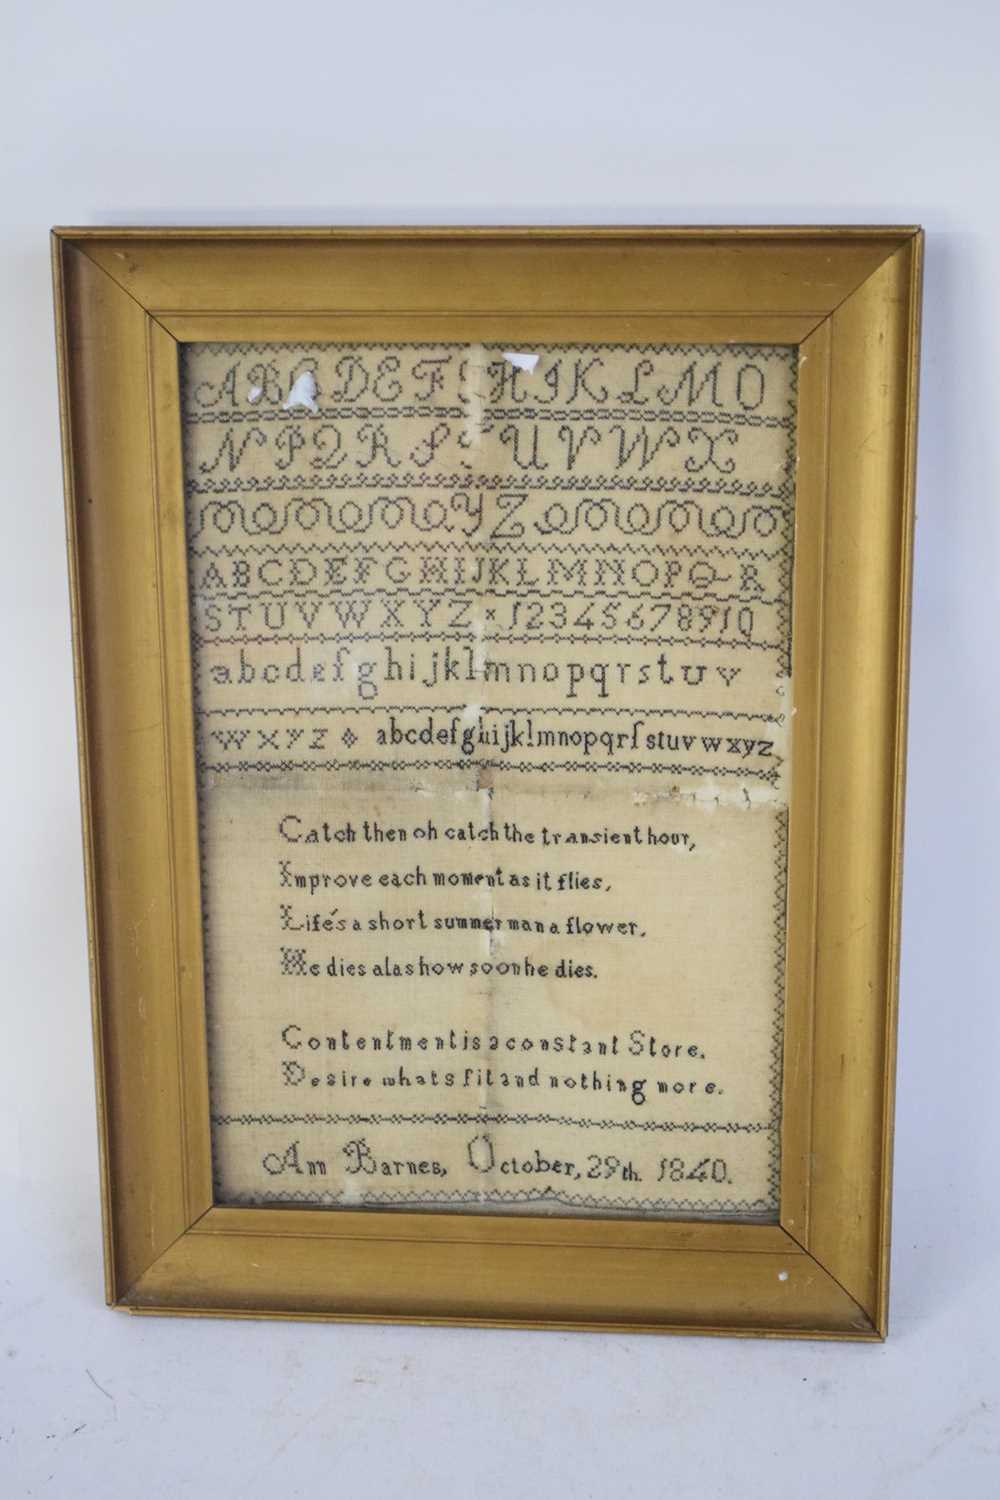 19th century needlework sampler with fine clear stitch of rows of letters, numbers and religious